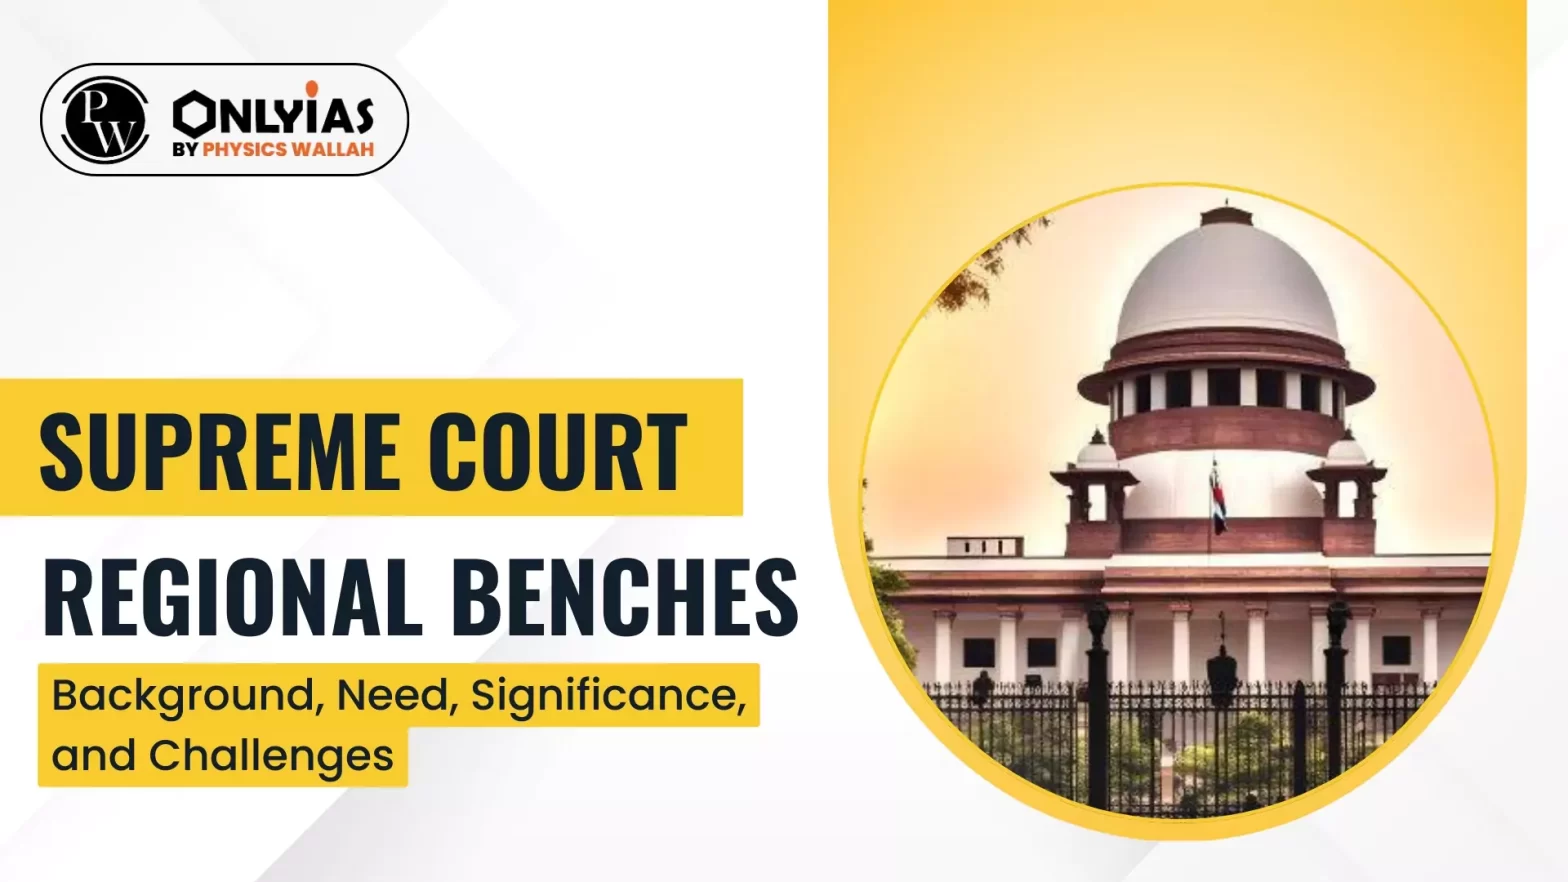 Supreme Court Regional Benches: Background, Need, Significance, and Challenges